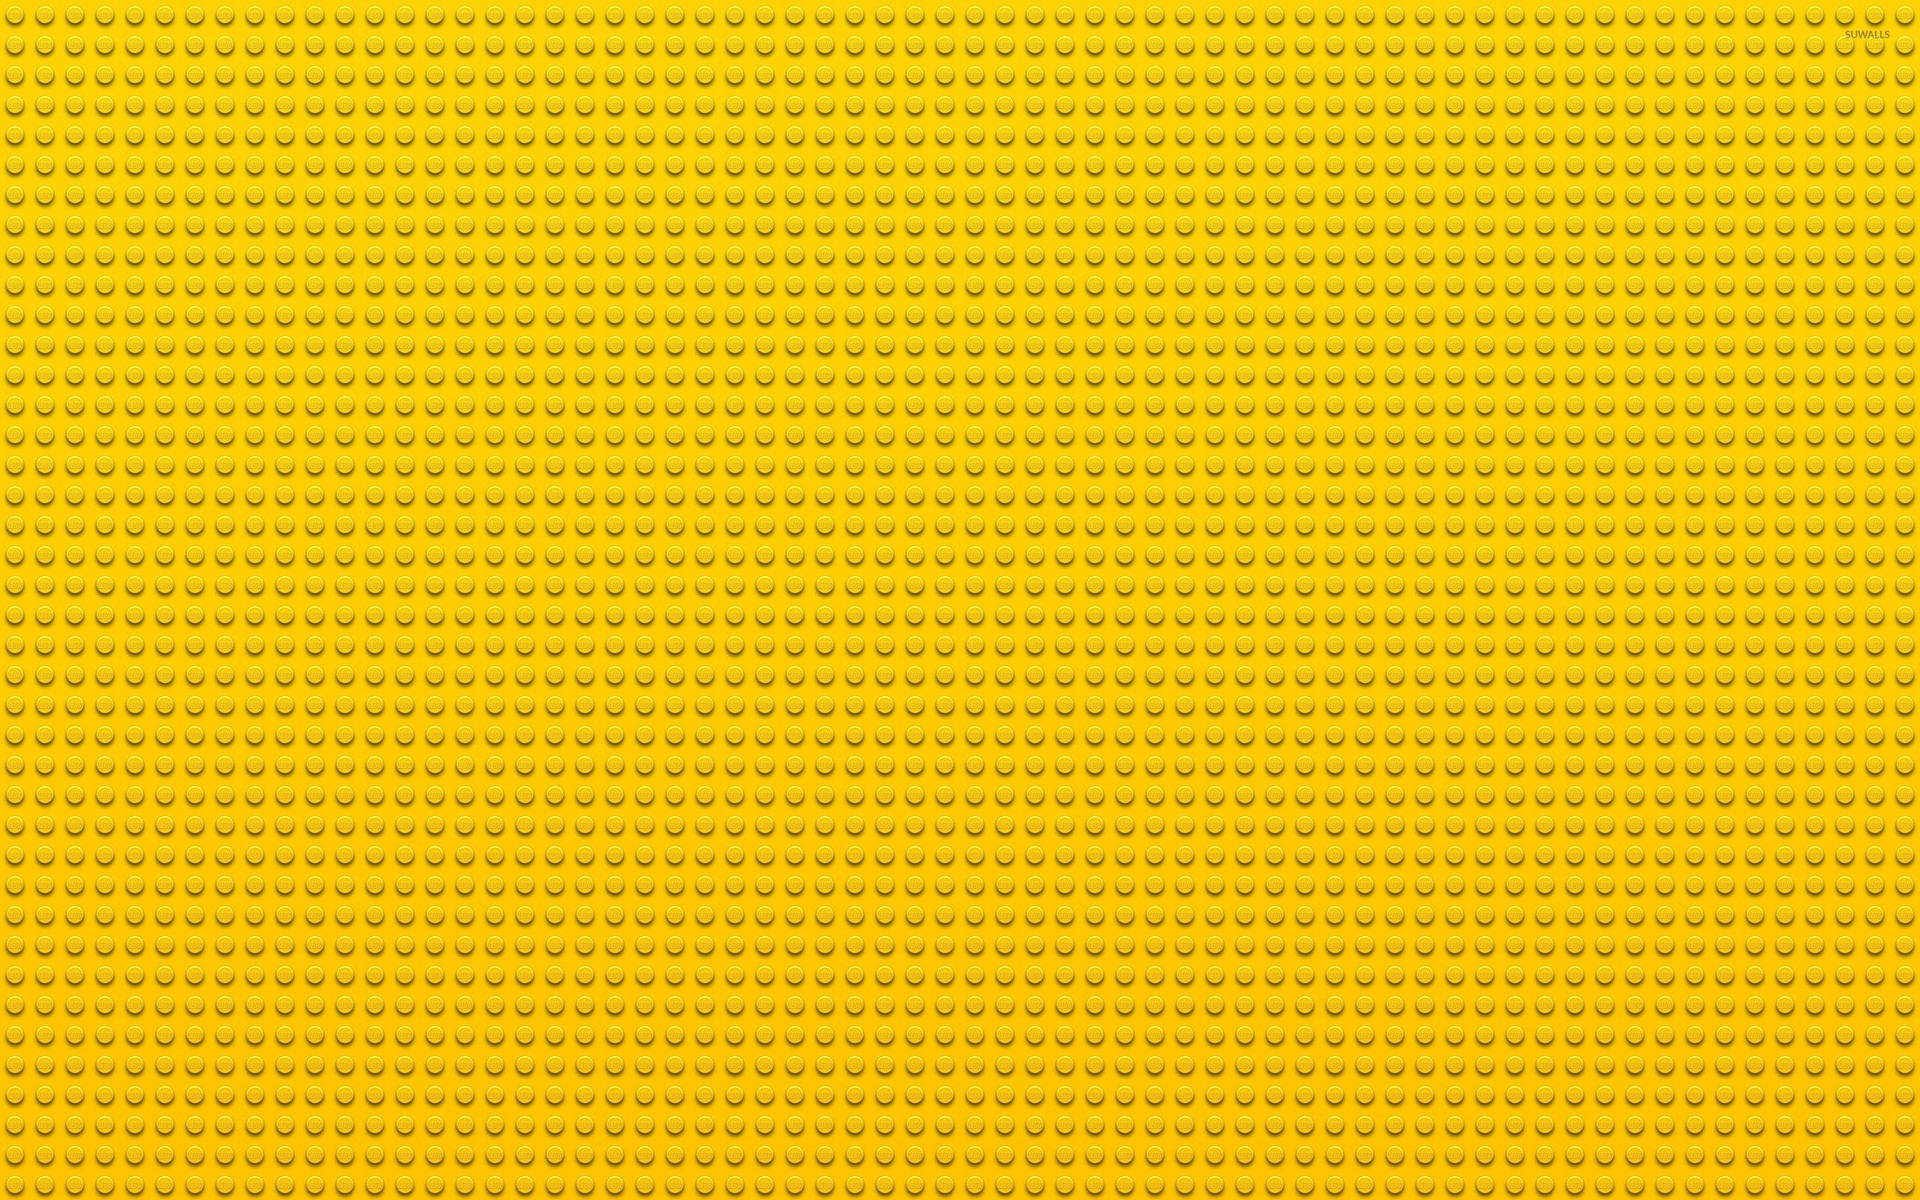 Yellow Lego Inspired Background Wallpaper